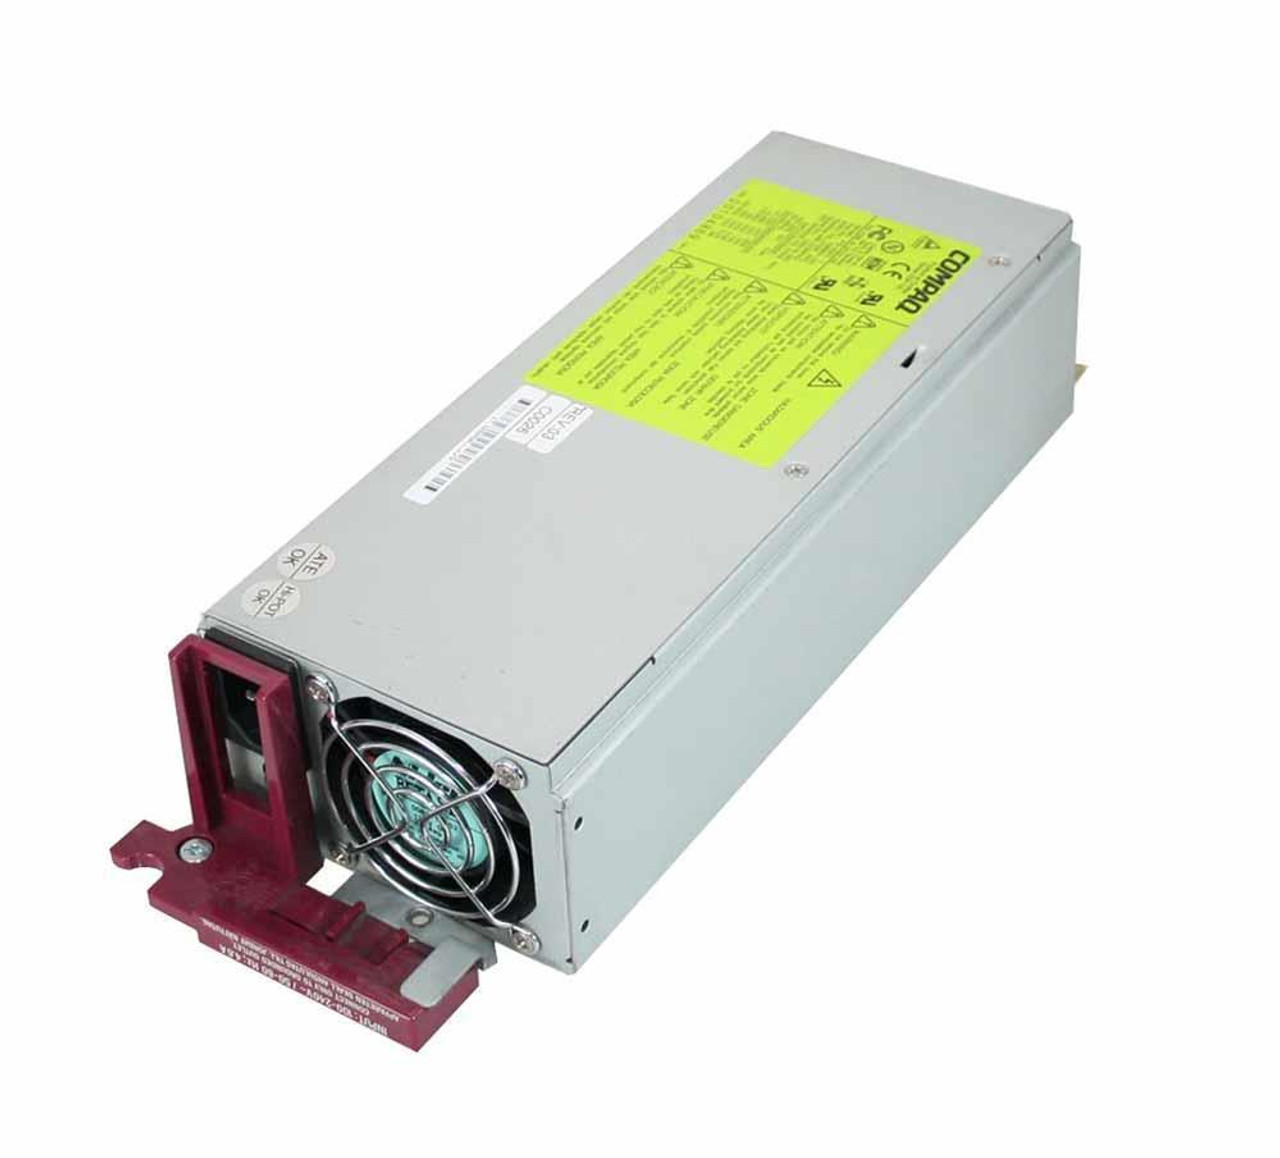 PS6301 HP 275-Watts Hot-Plug Power Supply for ProLiant DL380